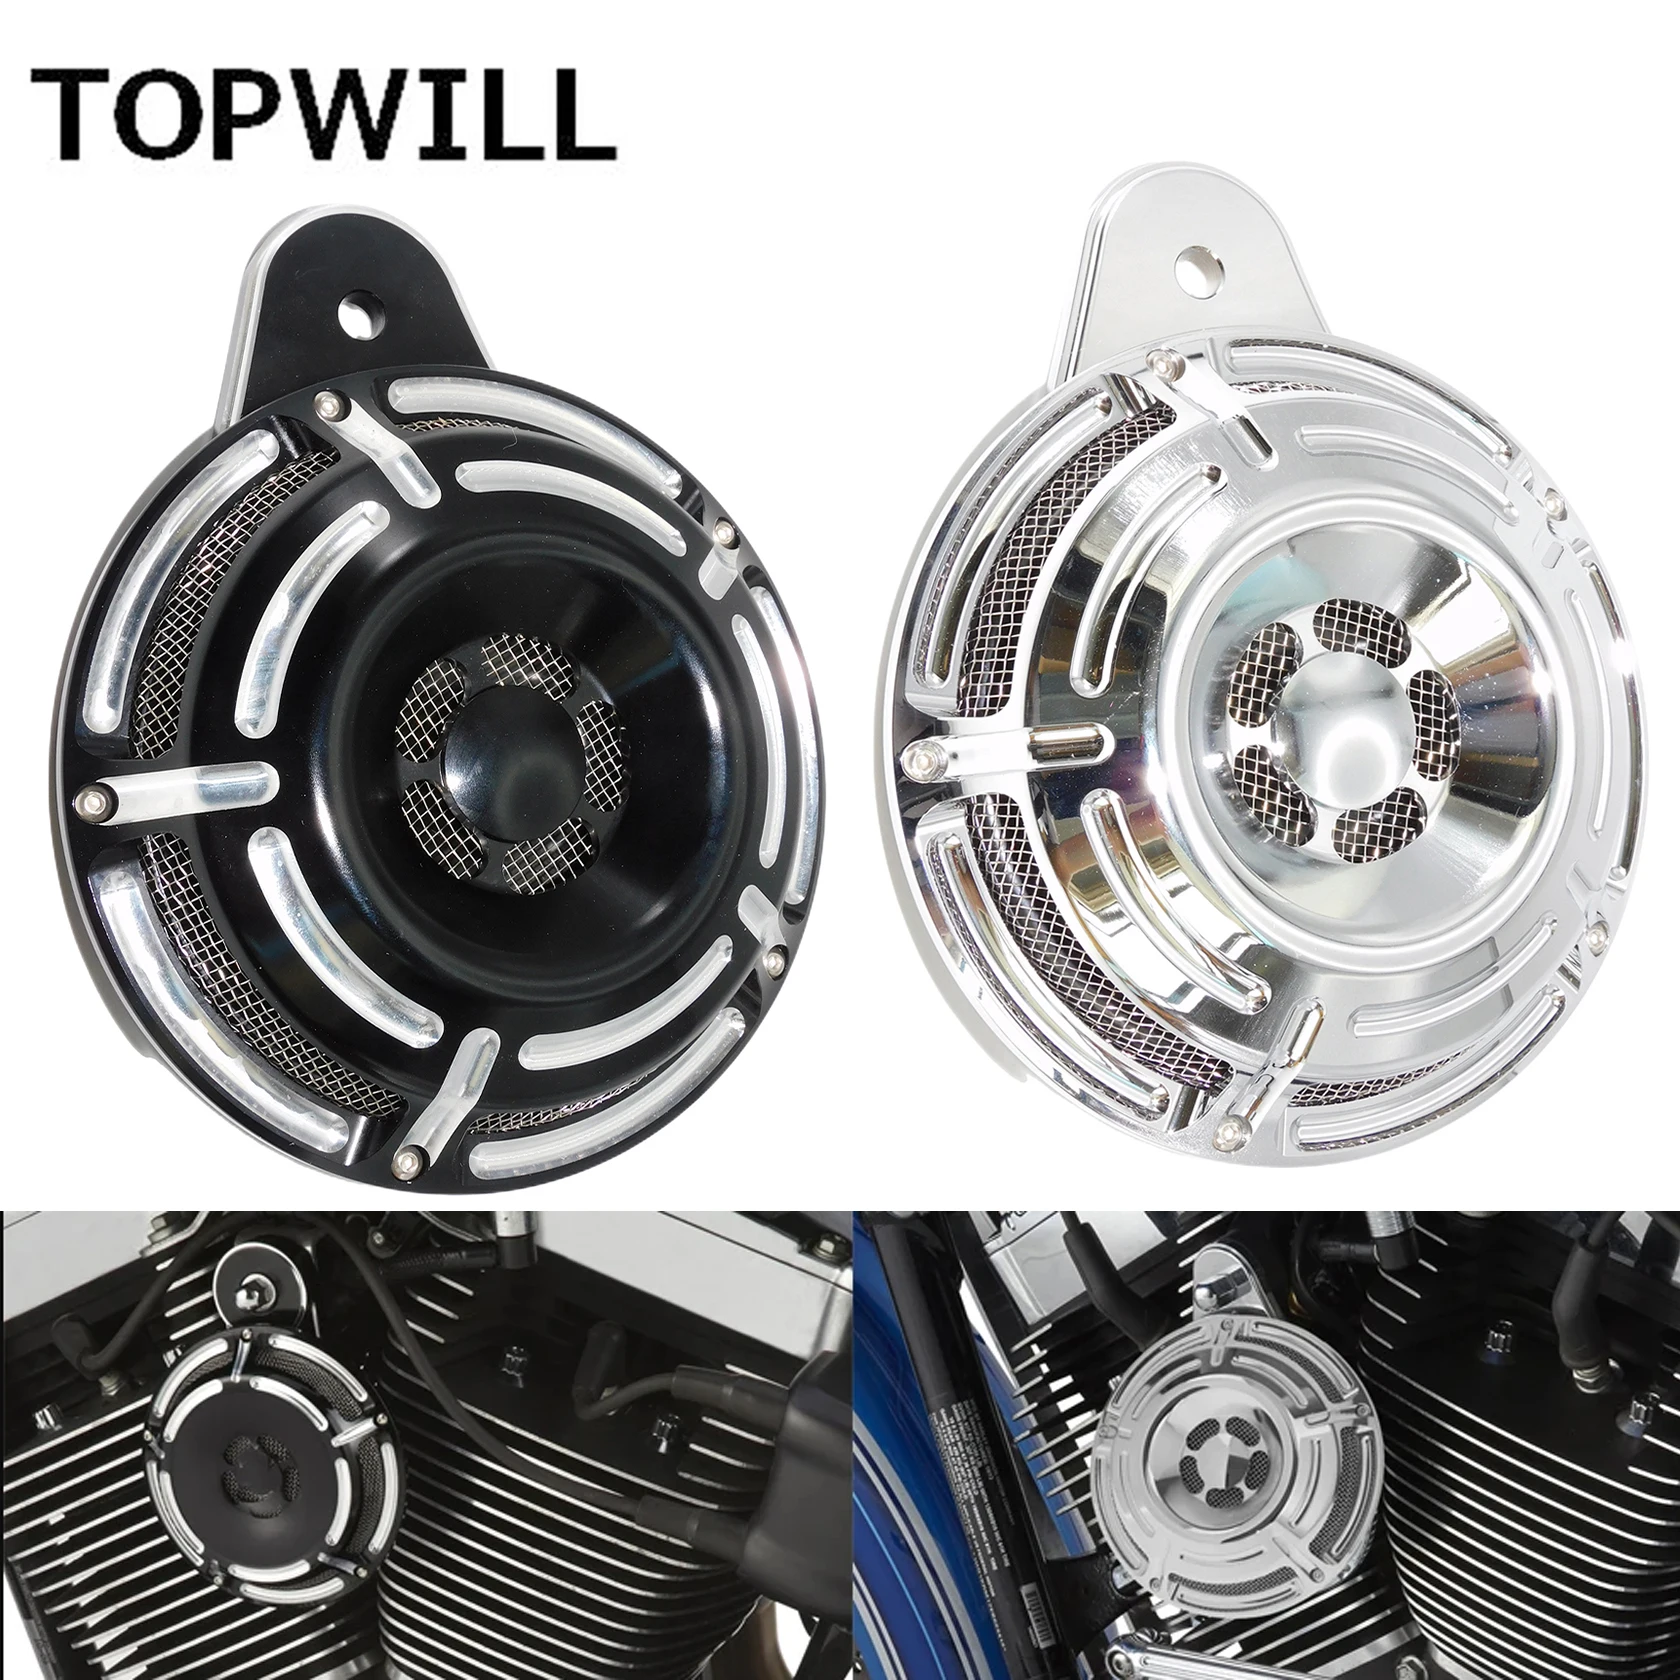 

Motorcycle Cut Speaker Horn Cover Aluminum Black/Chrome For Harley Touring Big Twin Electra Glide 1991-2017 Sportster XL 07-2018